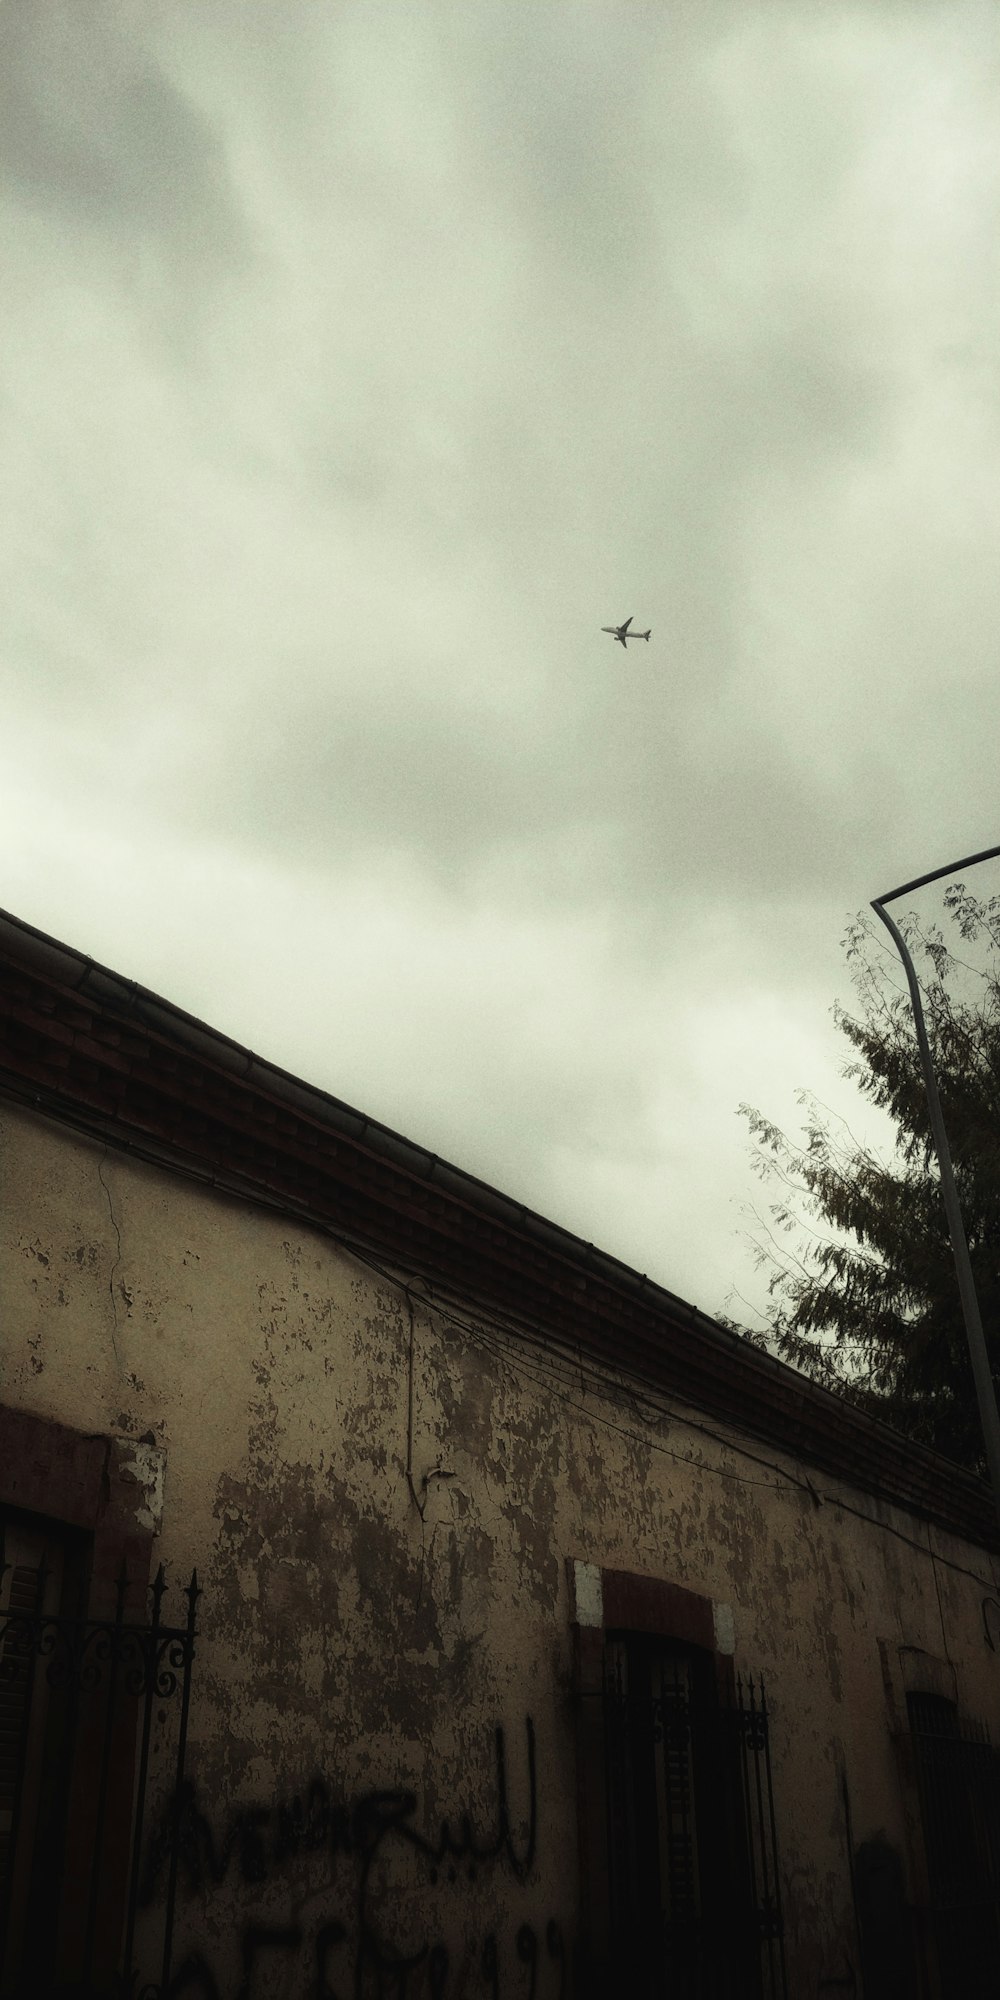 an airplane flying over a building with graffiti on it